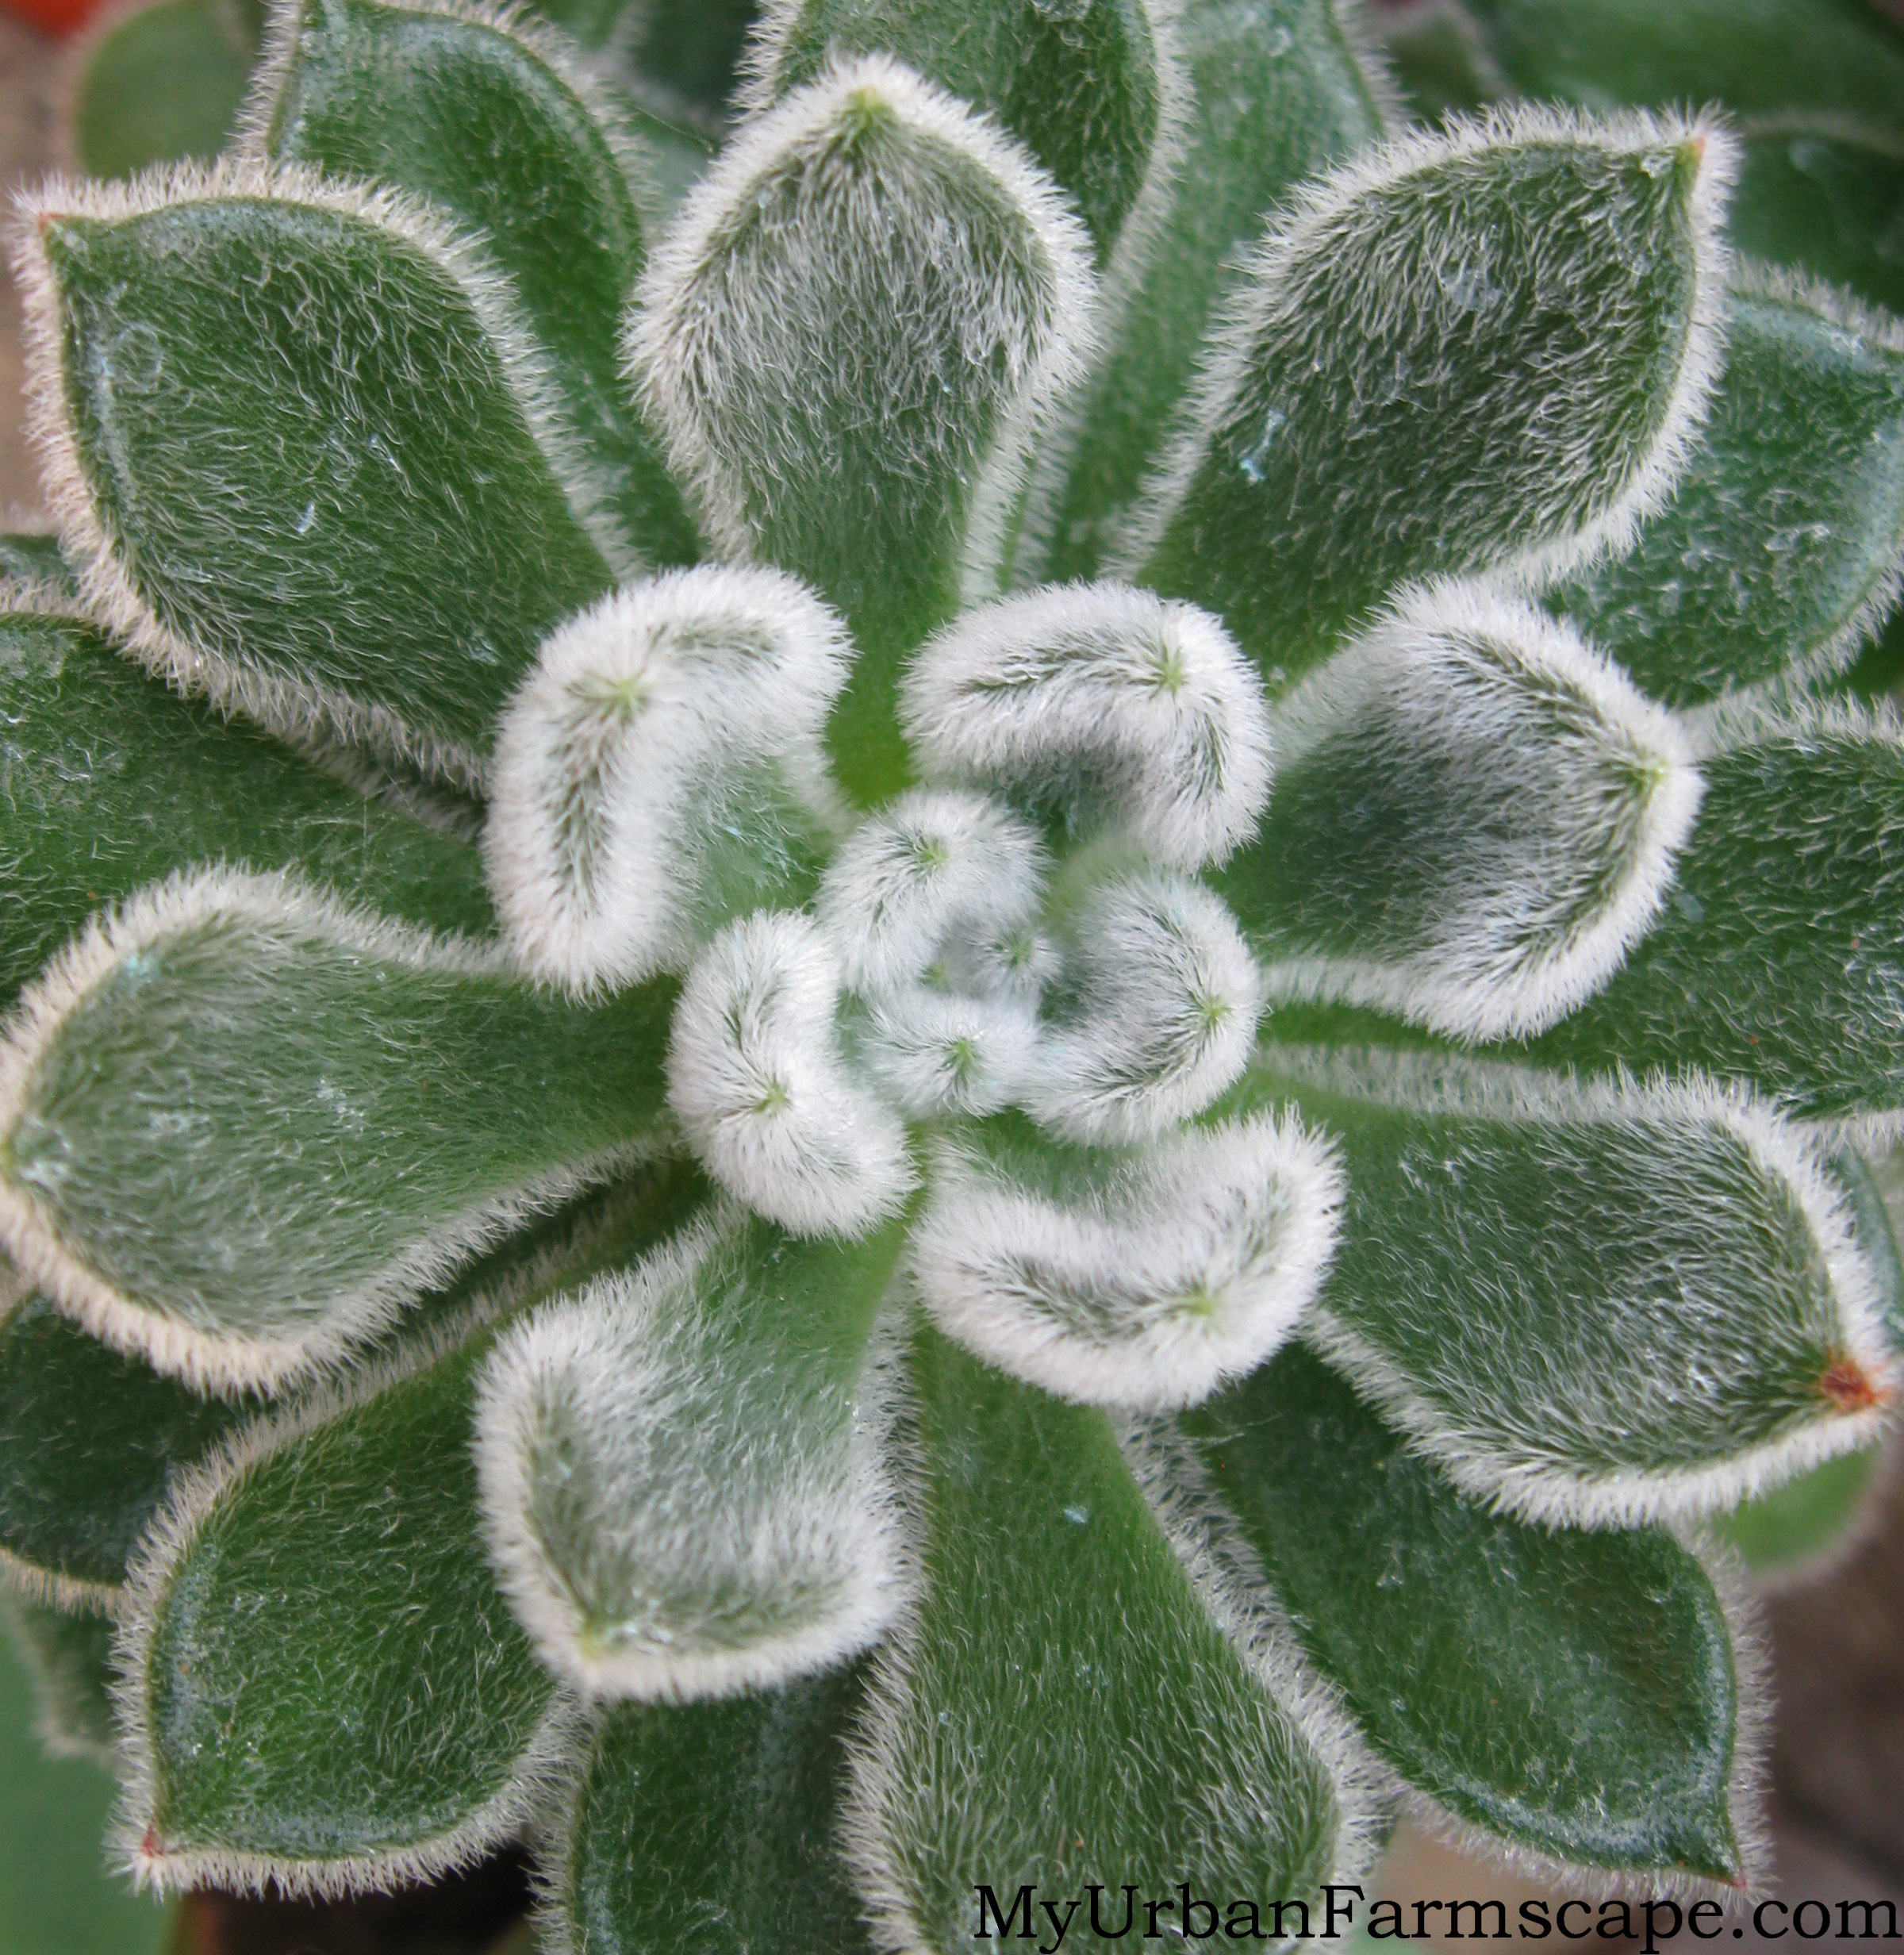 Best Plants With Fuzzy Leaves At Rosette Fuzzy on Uncategorized ...